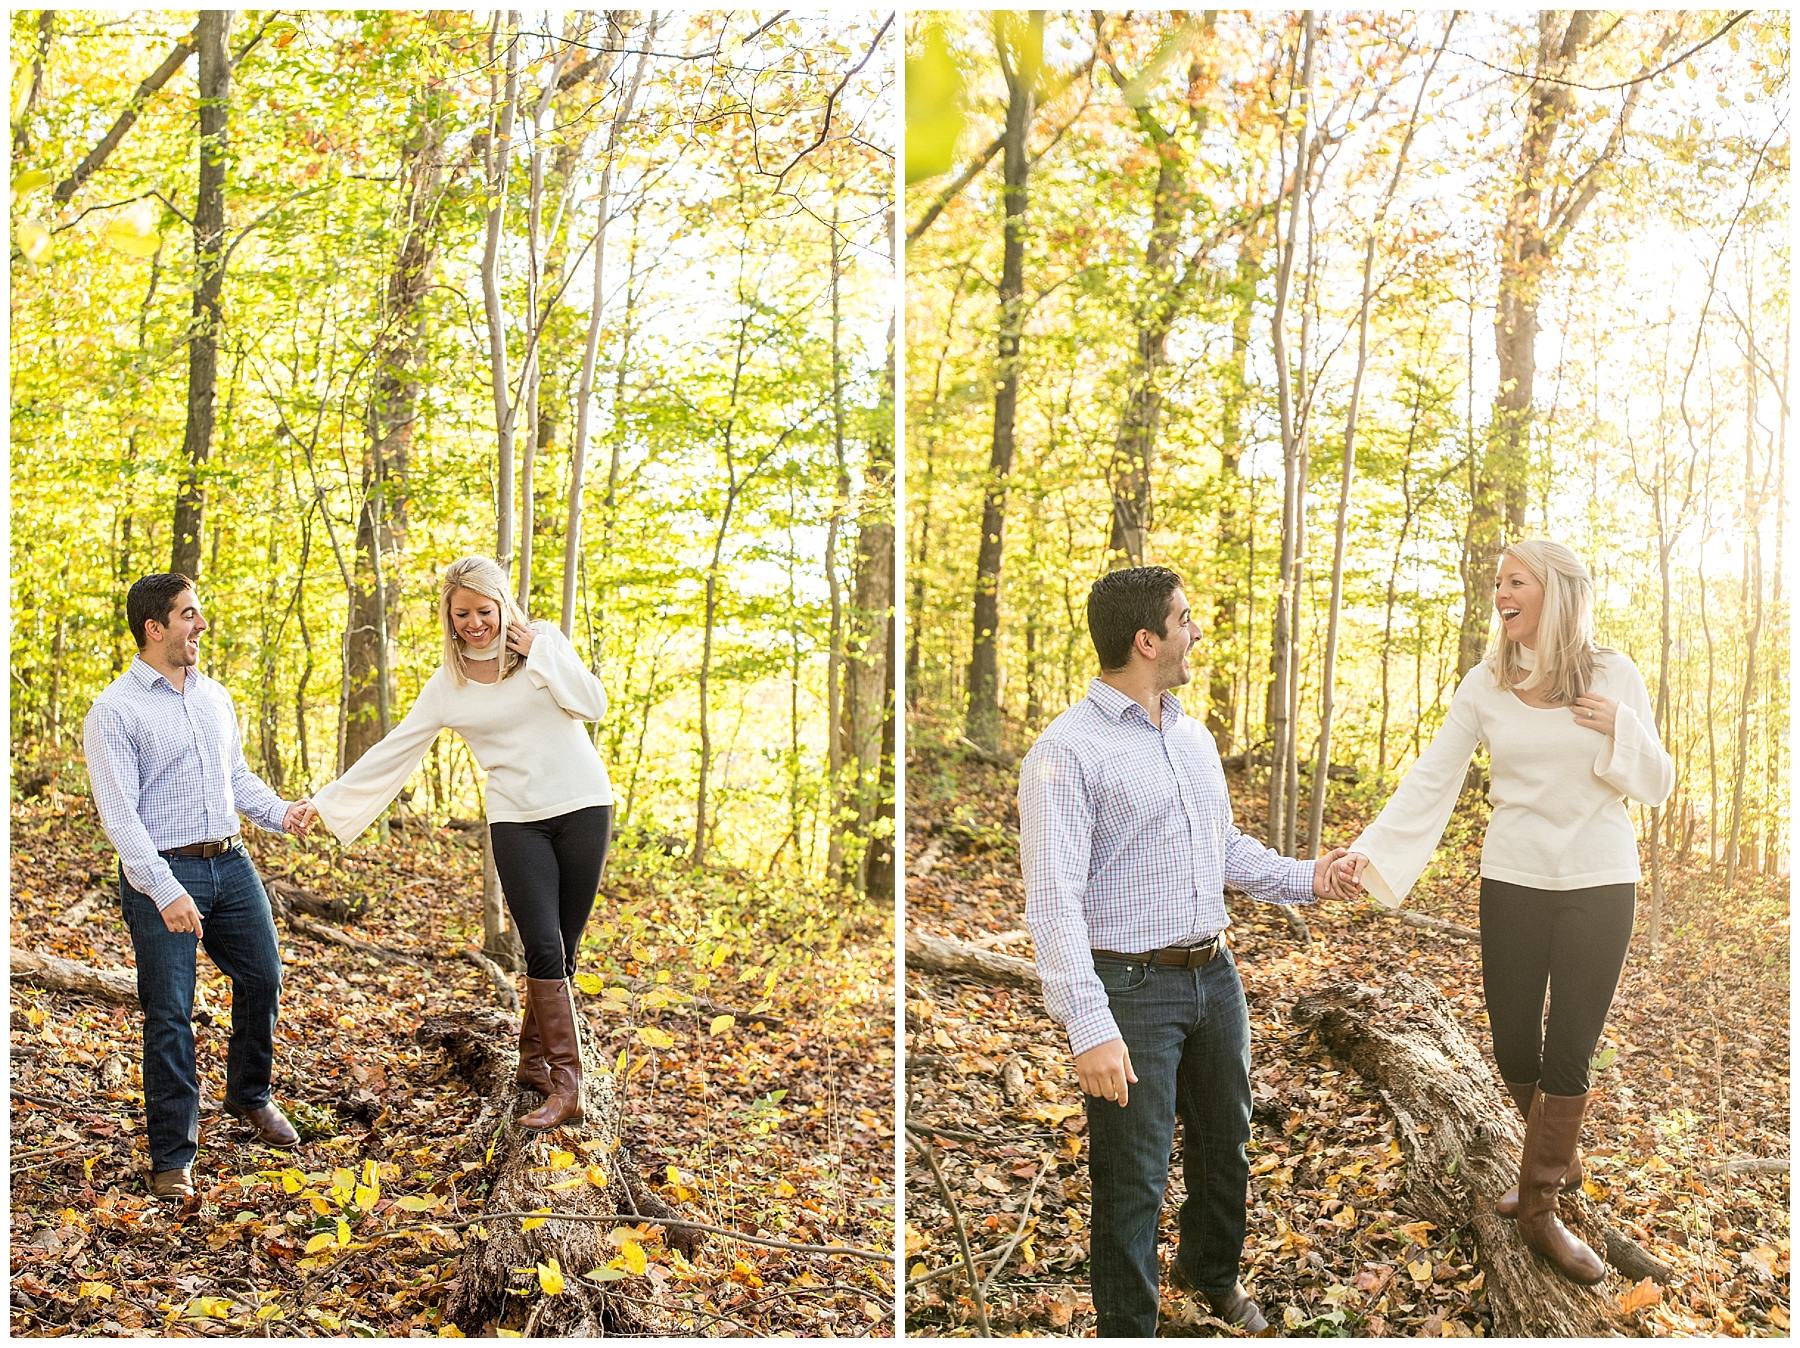 Nicole Mike Centennial Park Engagement Session Living Radiant Photography photos_0005.jpg